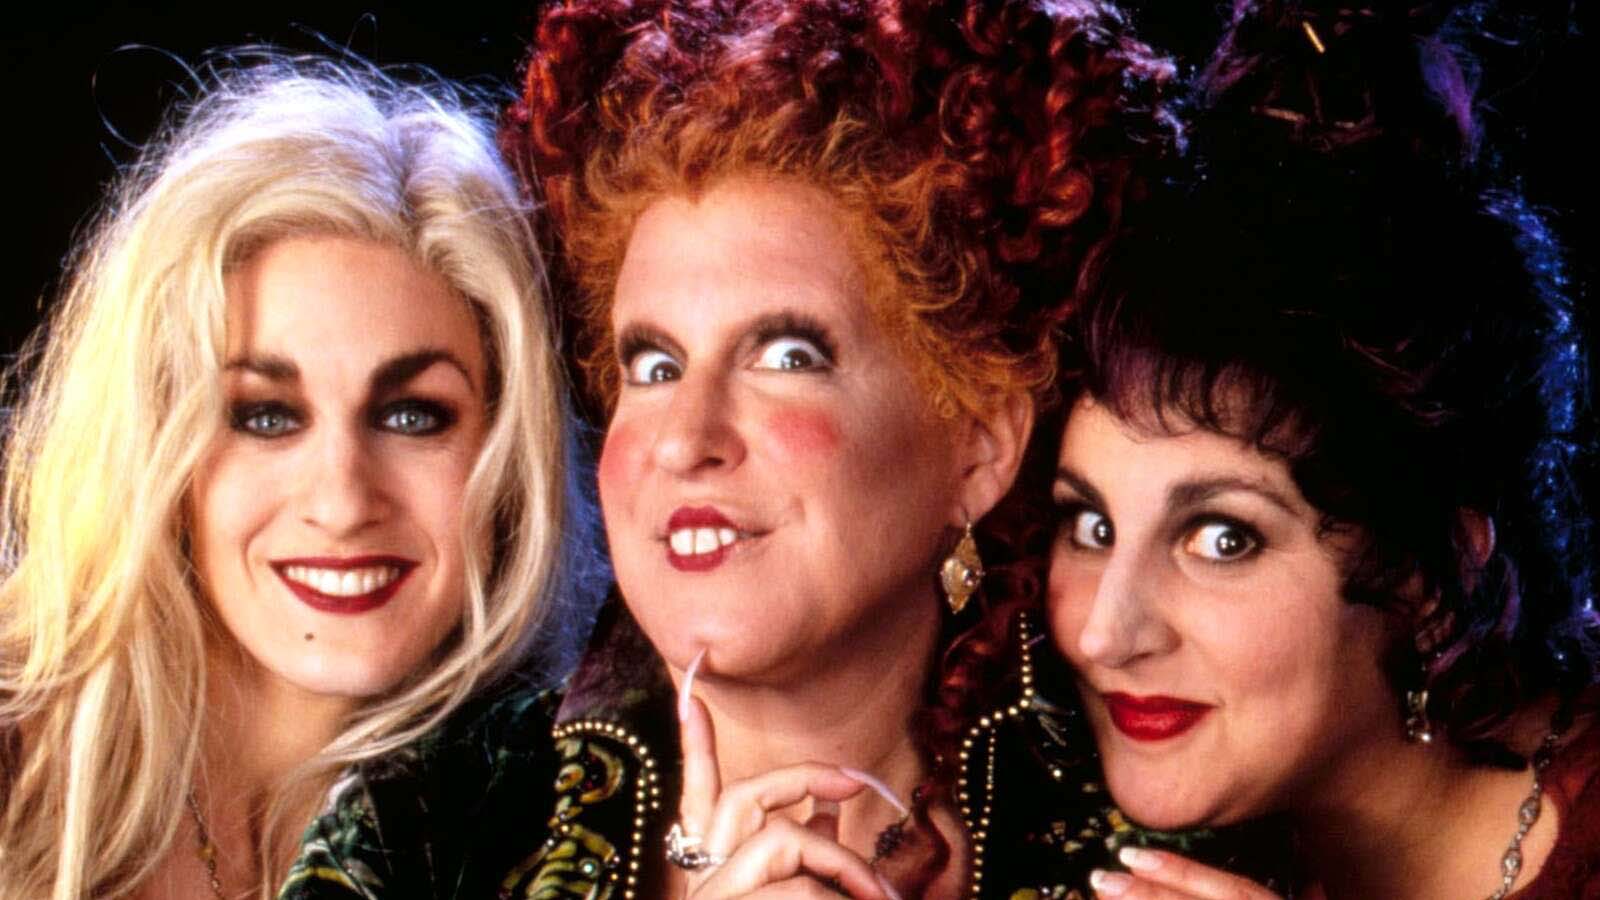 Disney teases 'Hocus Pocus 2' release with first trailer